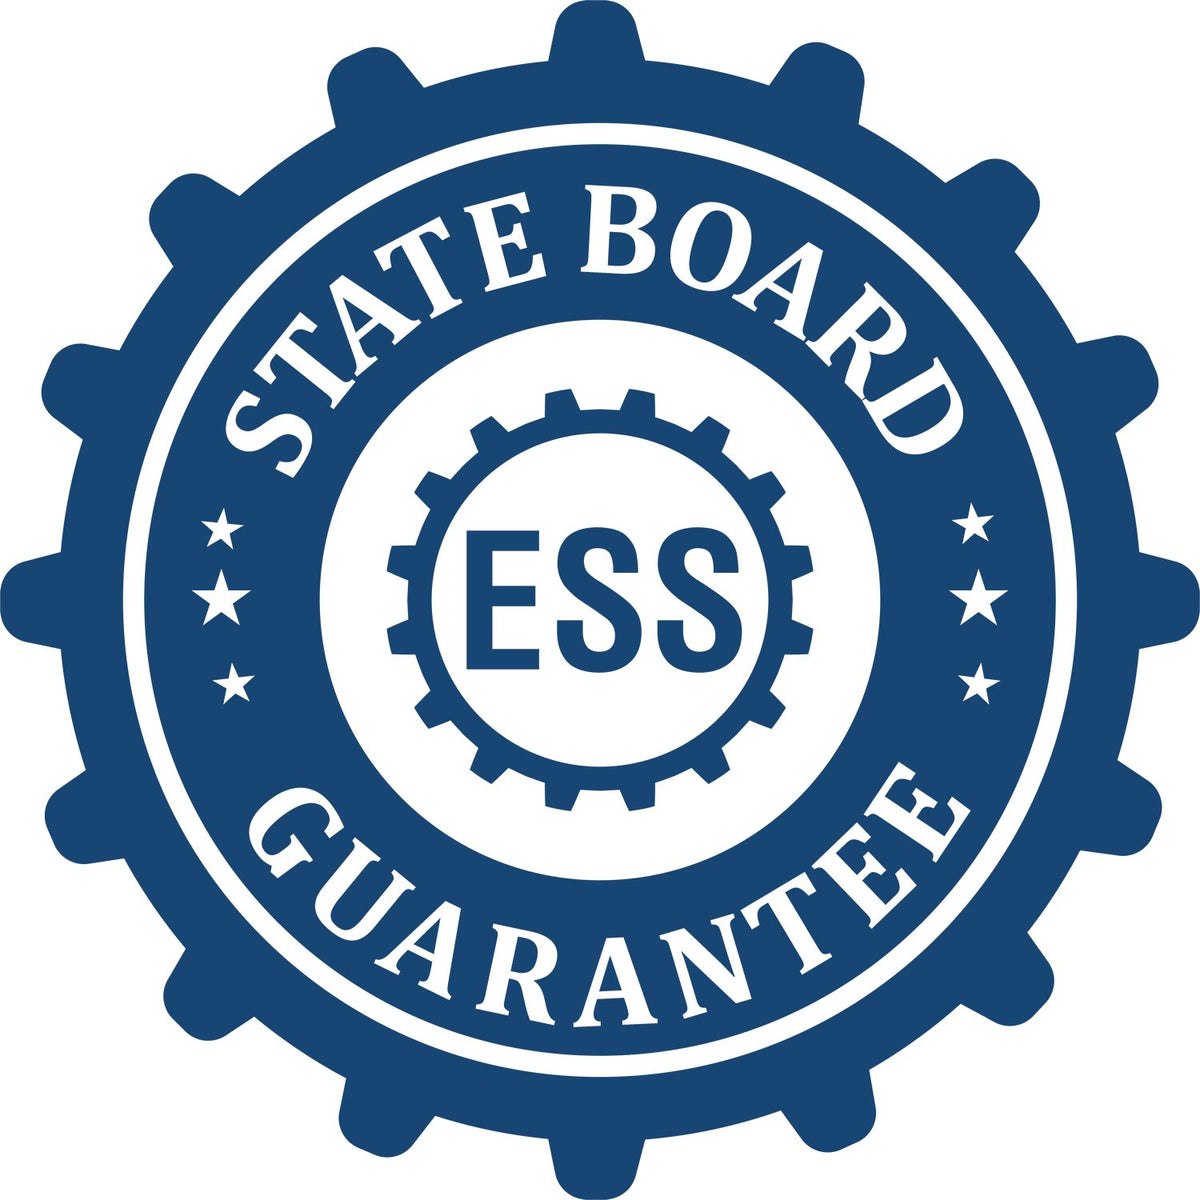 An emblem in a gear shape illustrating a state board guarantee for the Digital Louisiana PE Stamp and Electronic Seal for Louisiana Engineer product.